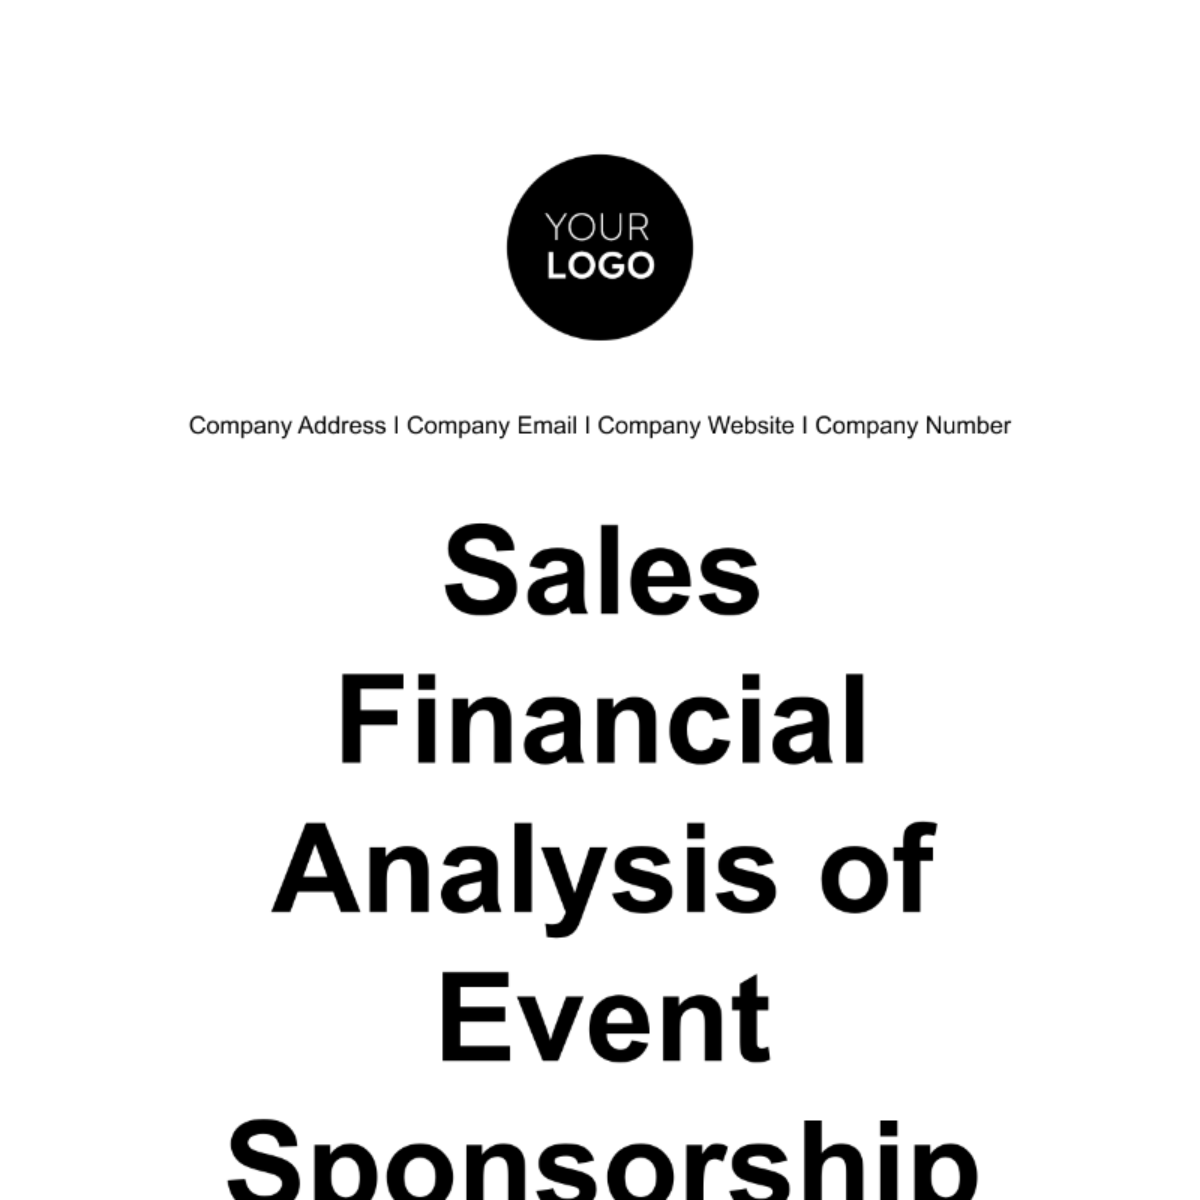 Sales Financial Analysis of Event Sponsorship Template